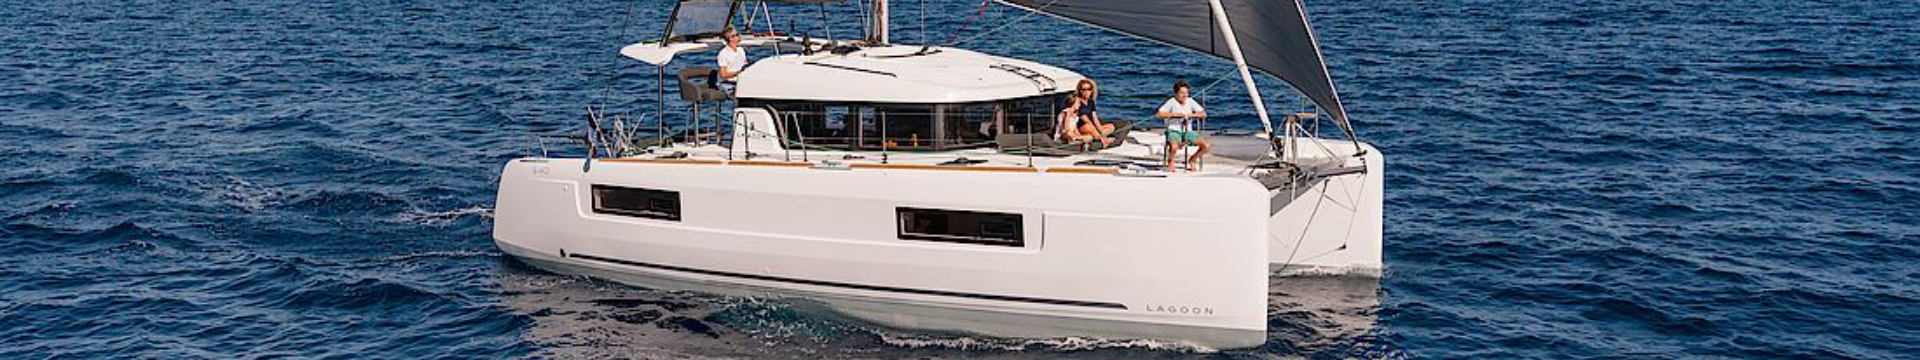 Lagoon 40 Sol Invictus VIP-equipped Main picture for the desktop